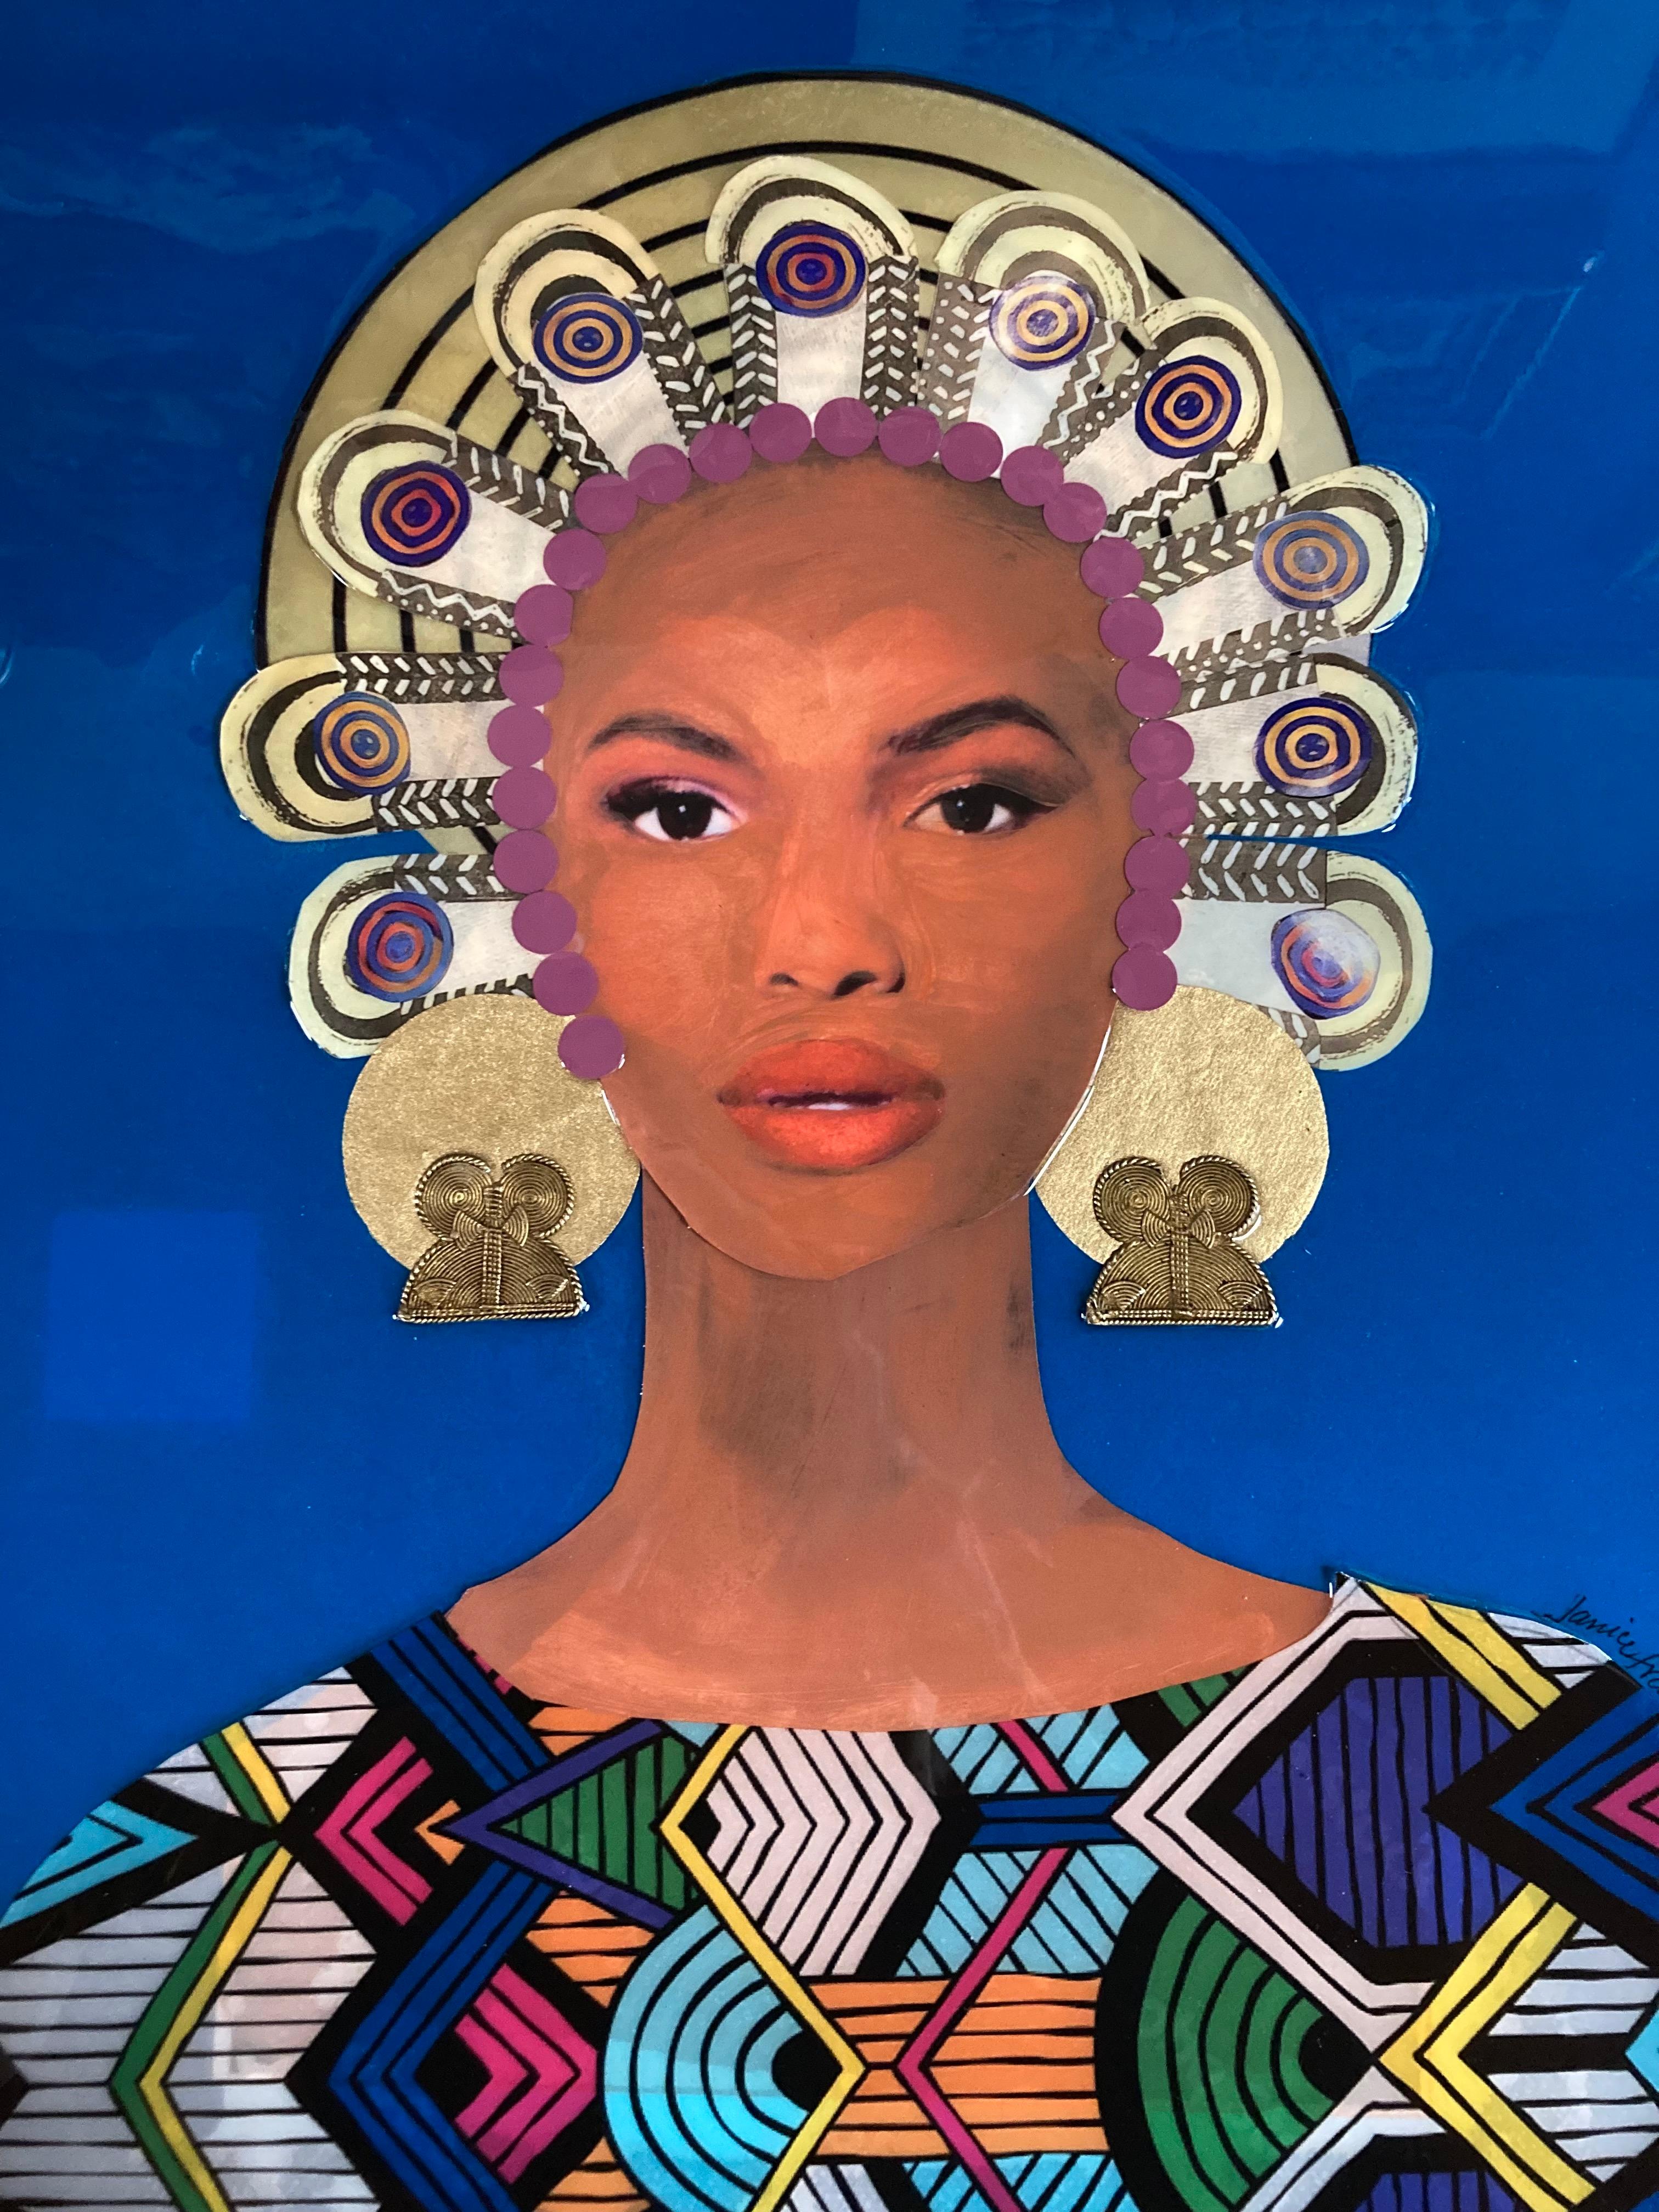 Janice Frame Figurative Painting - "African Diaspora" mixed media portrait of woman, gold headdress and graphic top